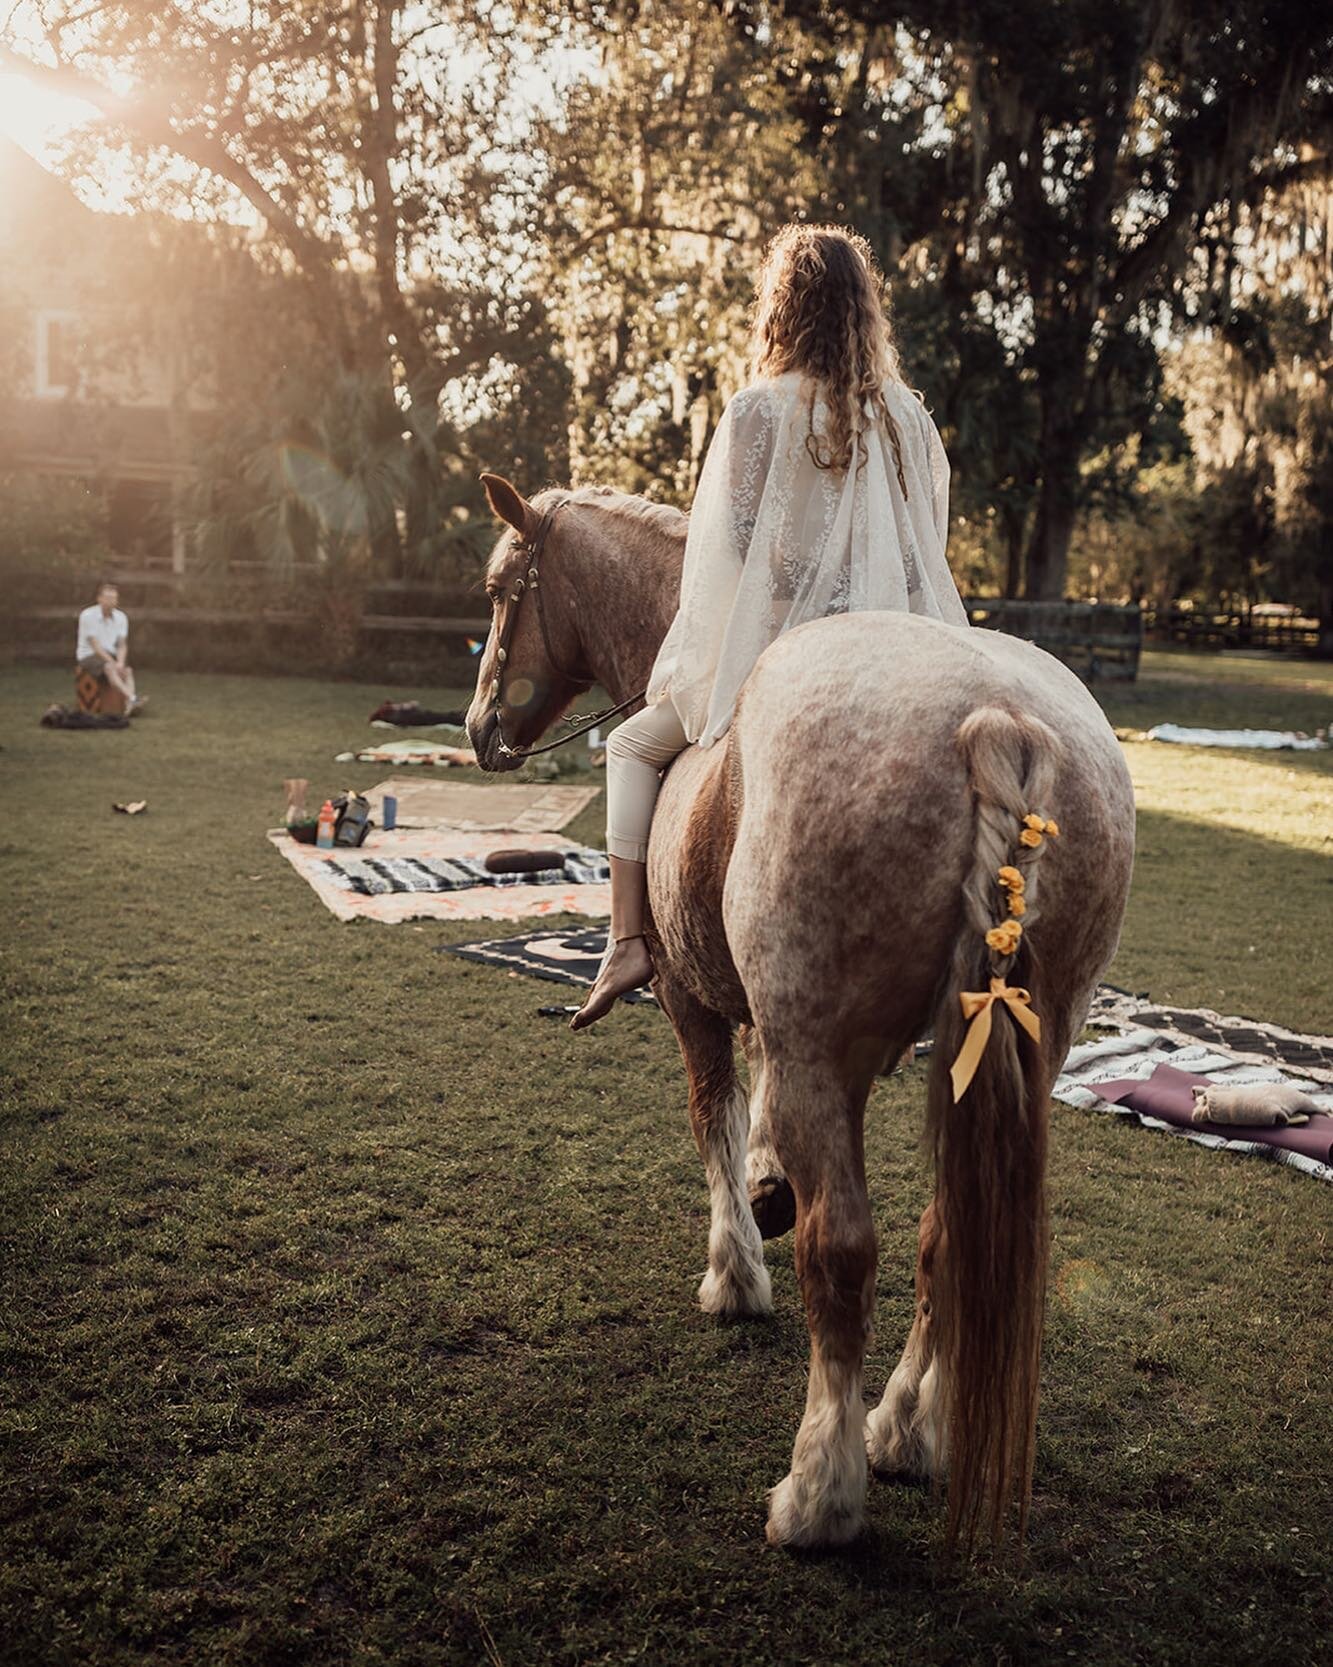 Some horse experiences might take you riding along beautiful sandy beaches, beneath dense jungle canopies, or across airy spacious deserts. With #CabaYoga, you can journey into the depth of your own landscape + learn how to navigate from within.

Joi